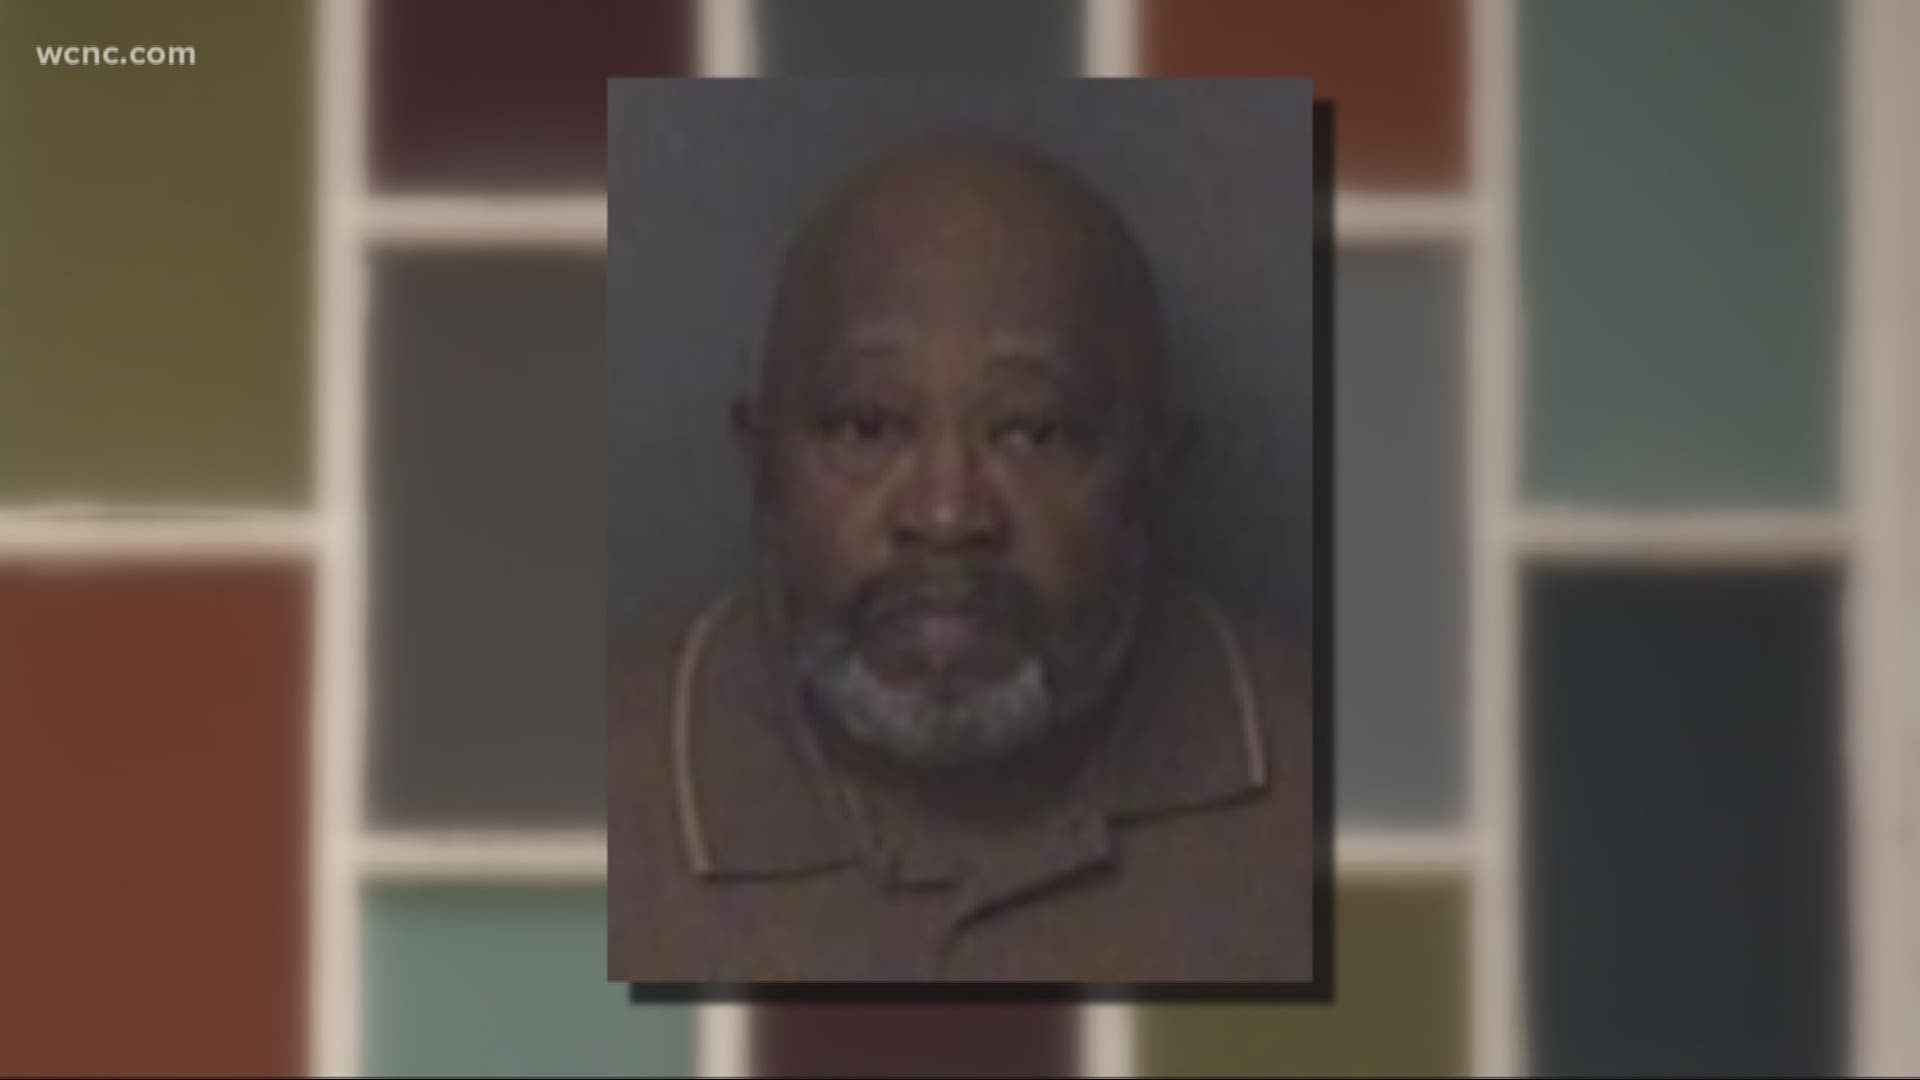 61-year-old Jerry Lewis Friday is accused of several sex crimes involving underage girls at the church.